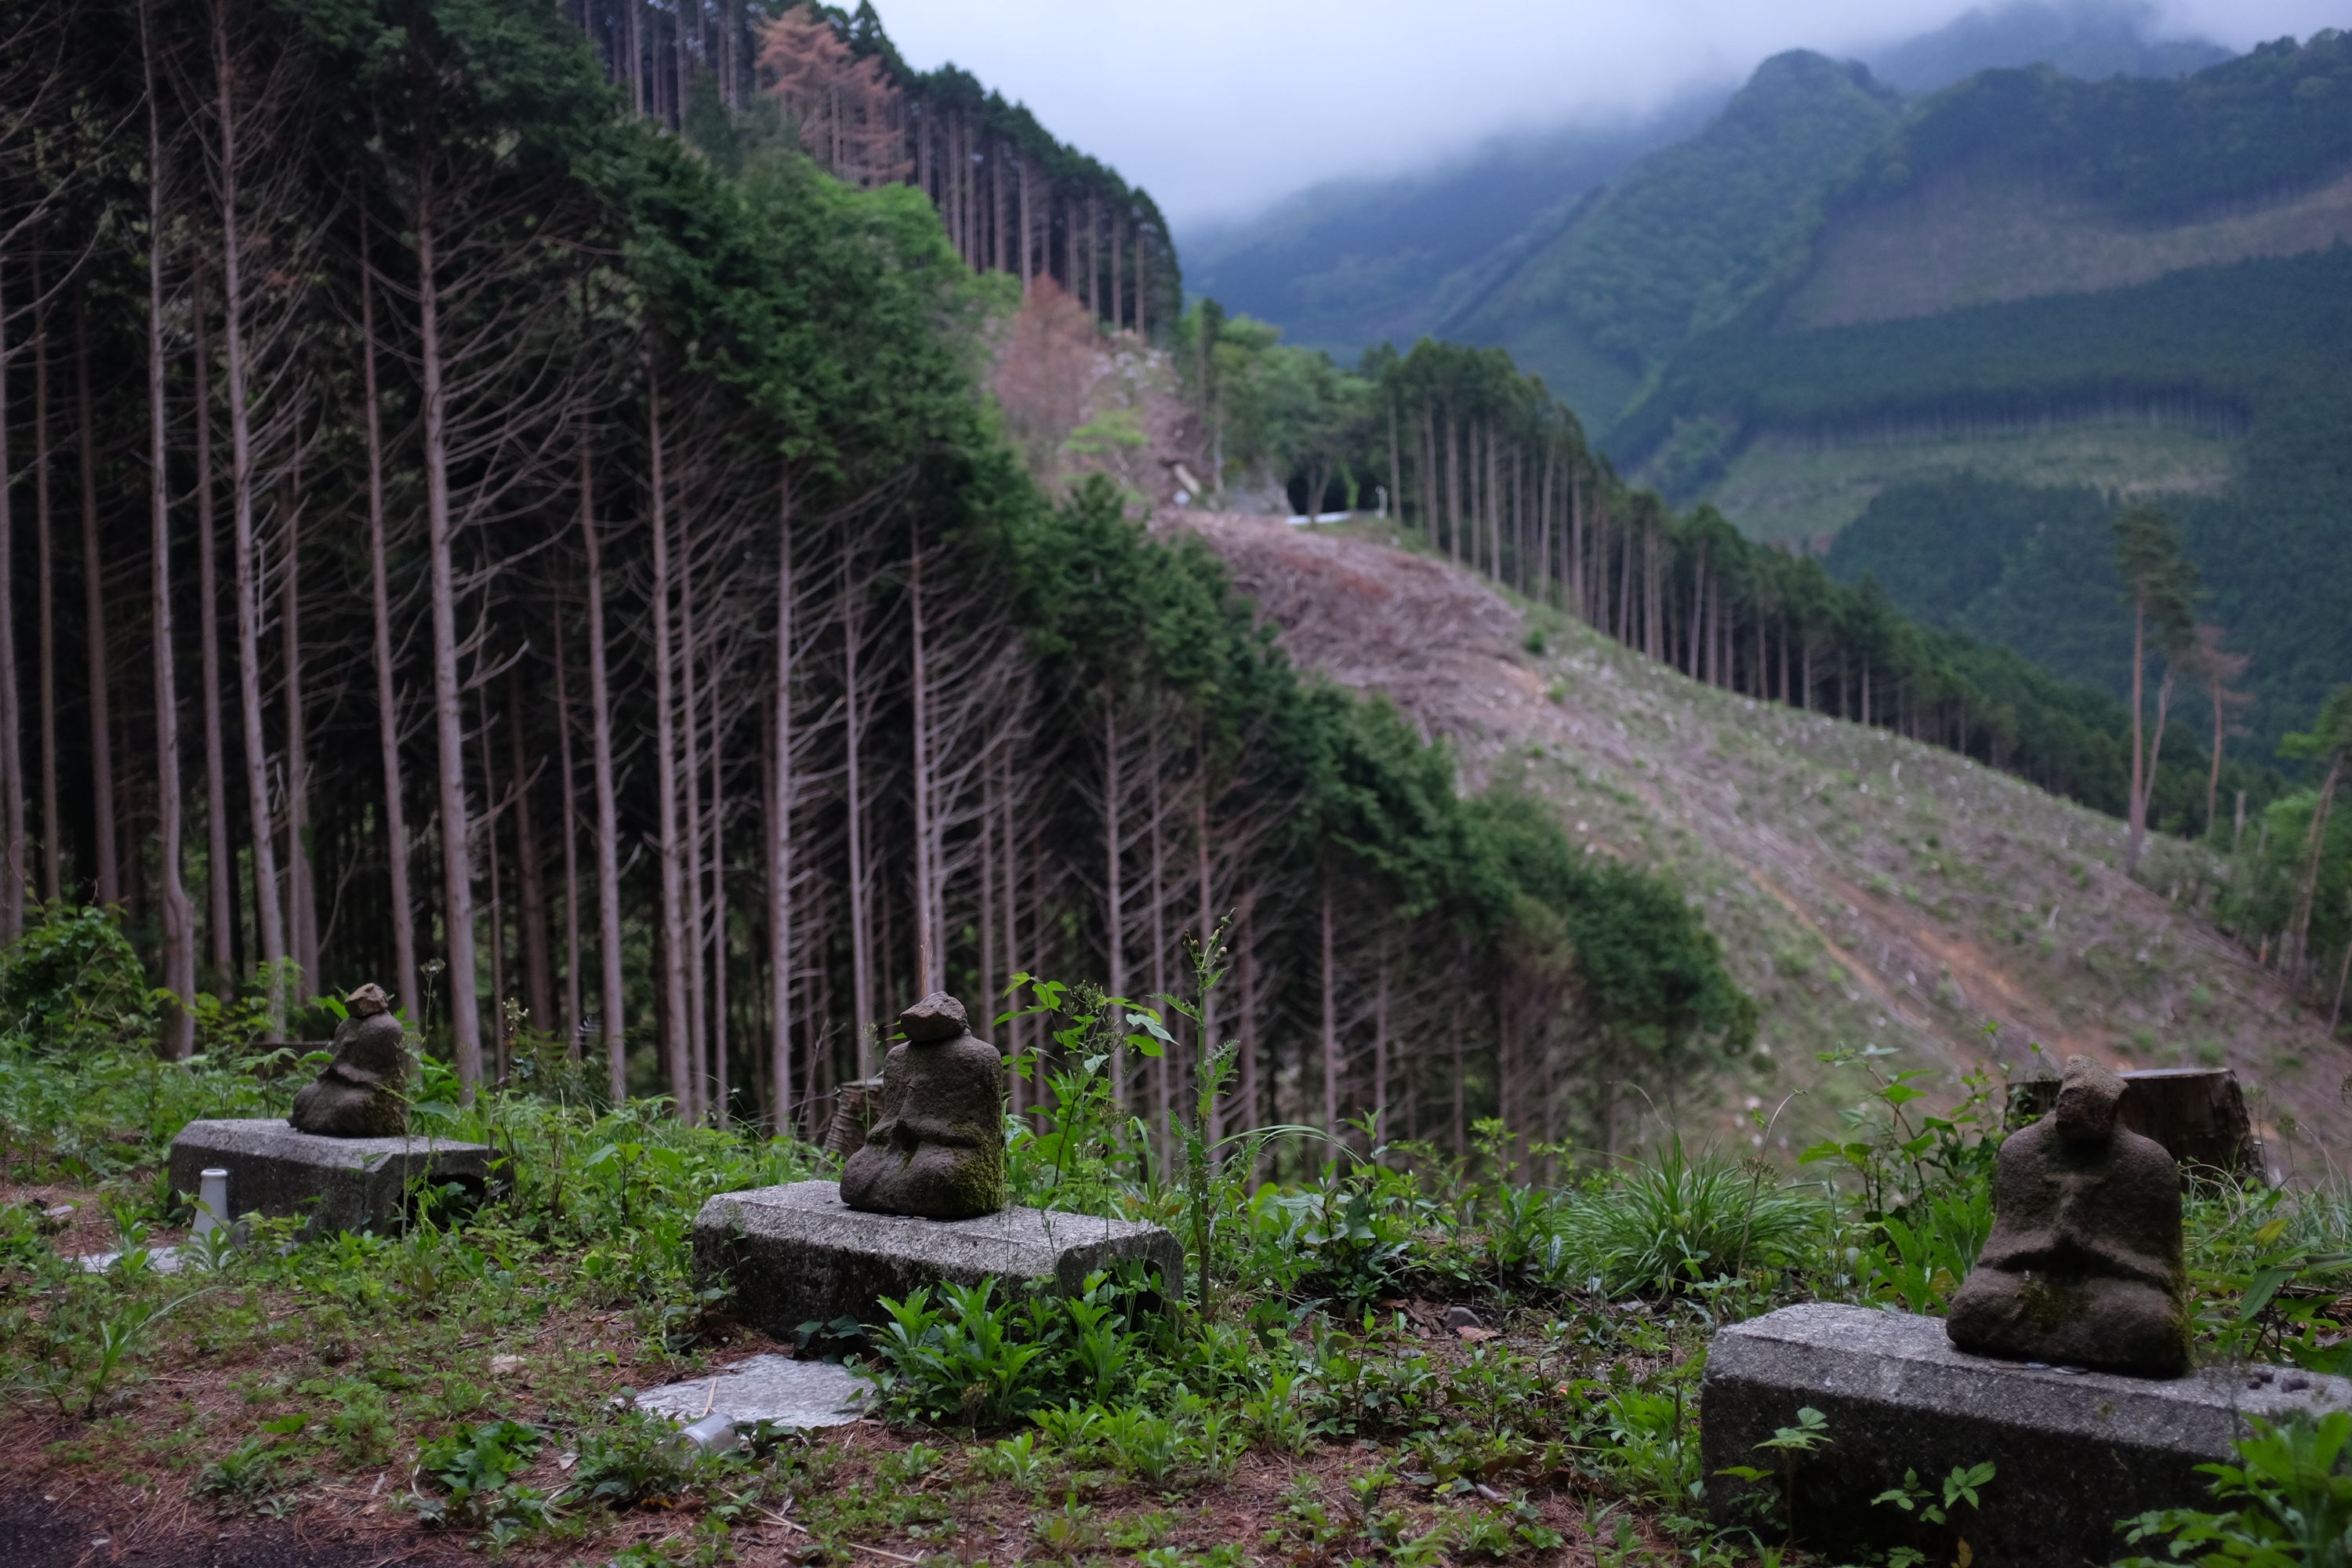 Three battered Buddhist roadside deities in front of heavily logged hillsides.